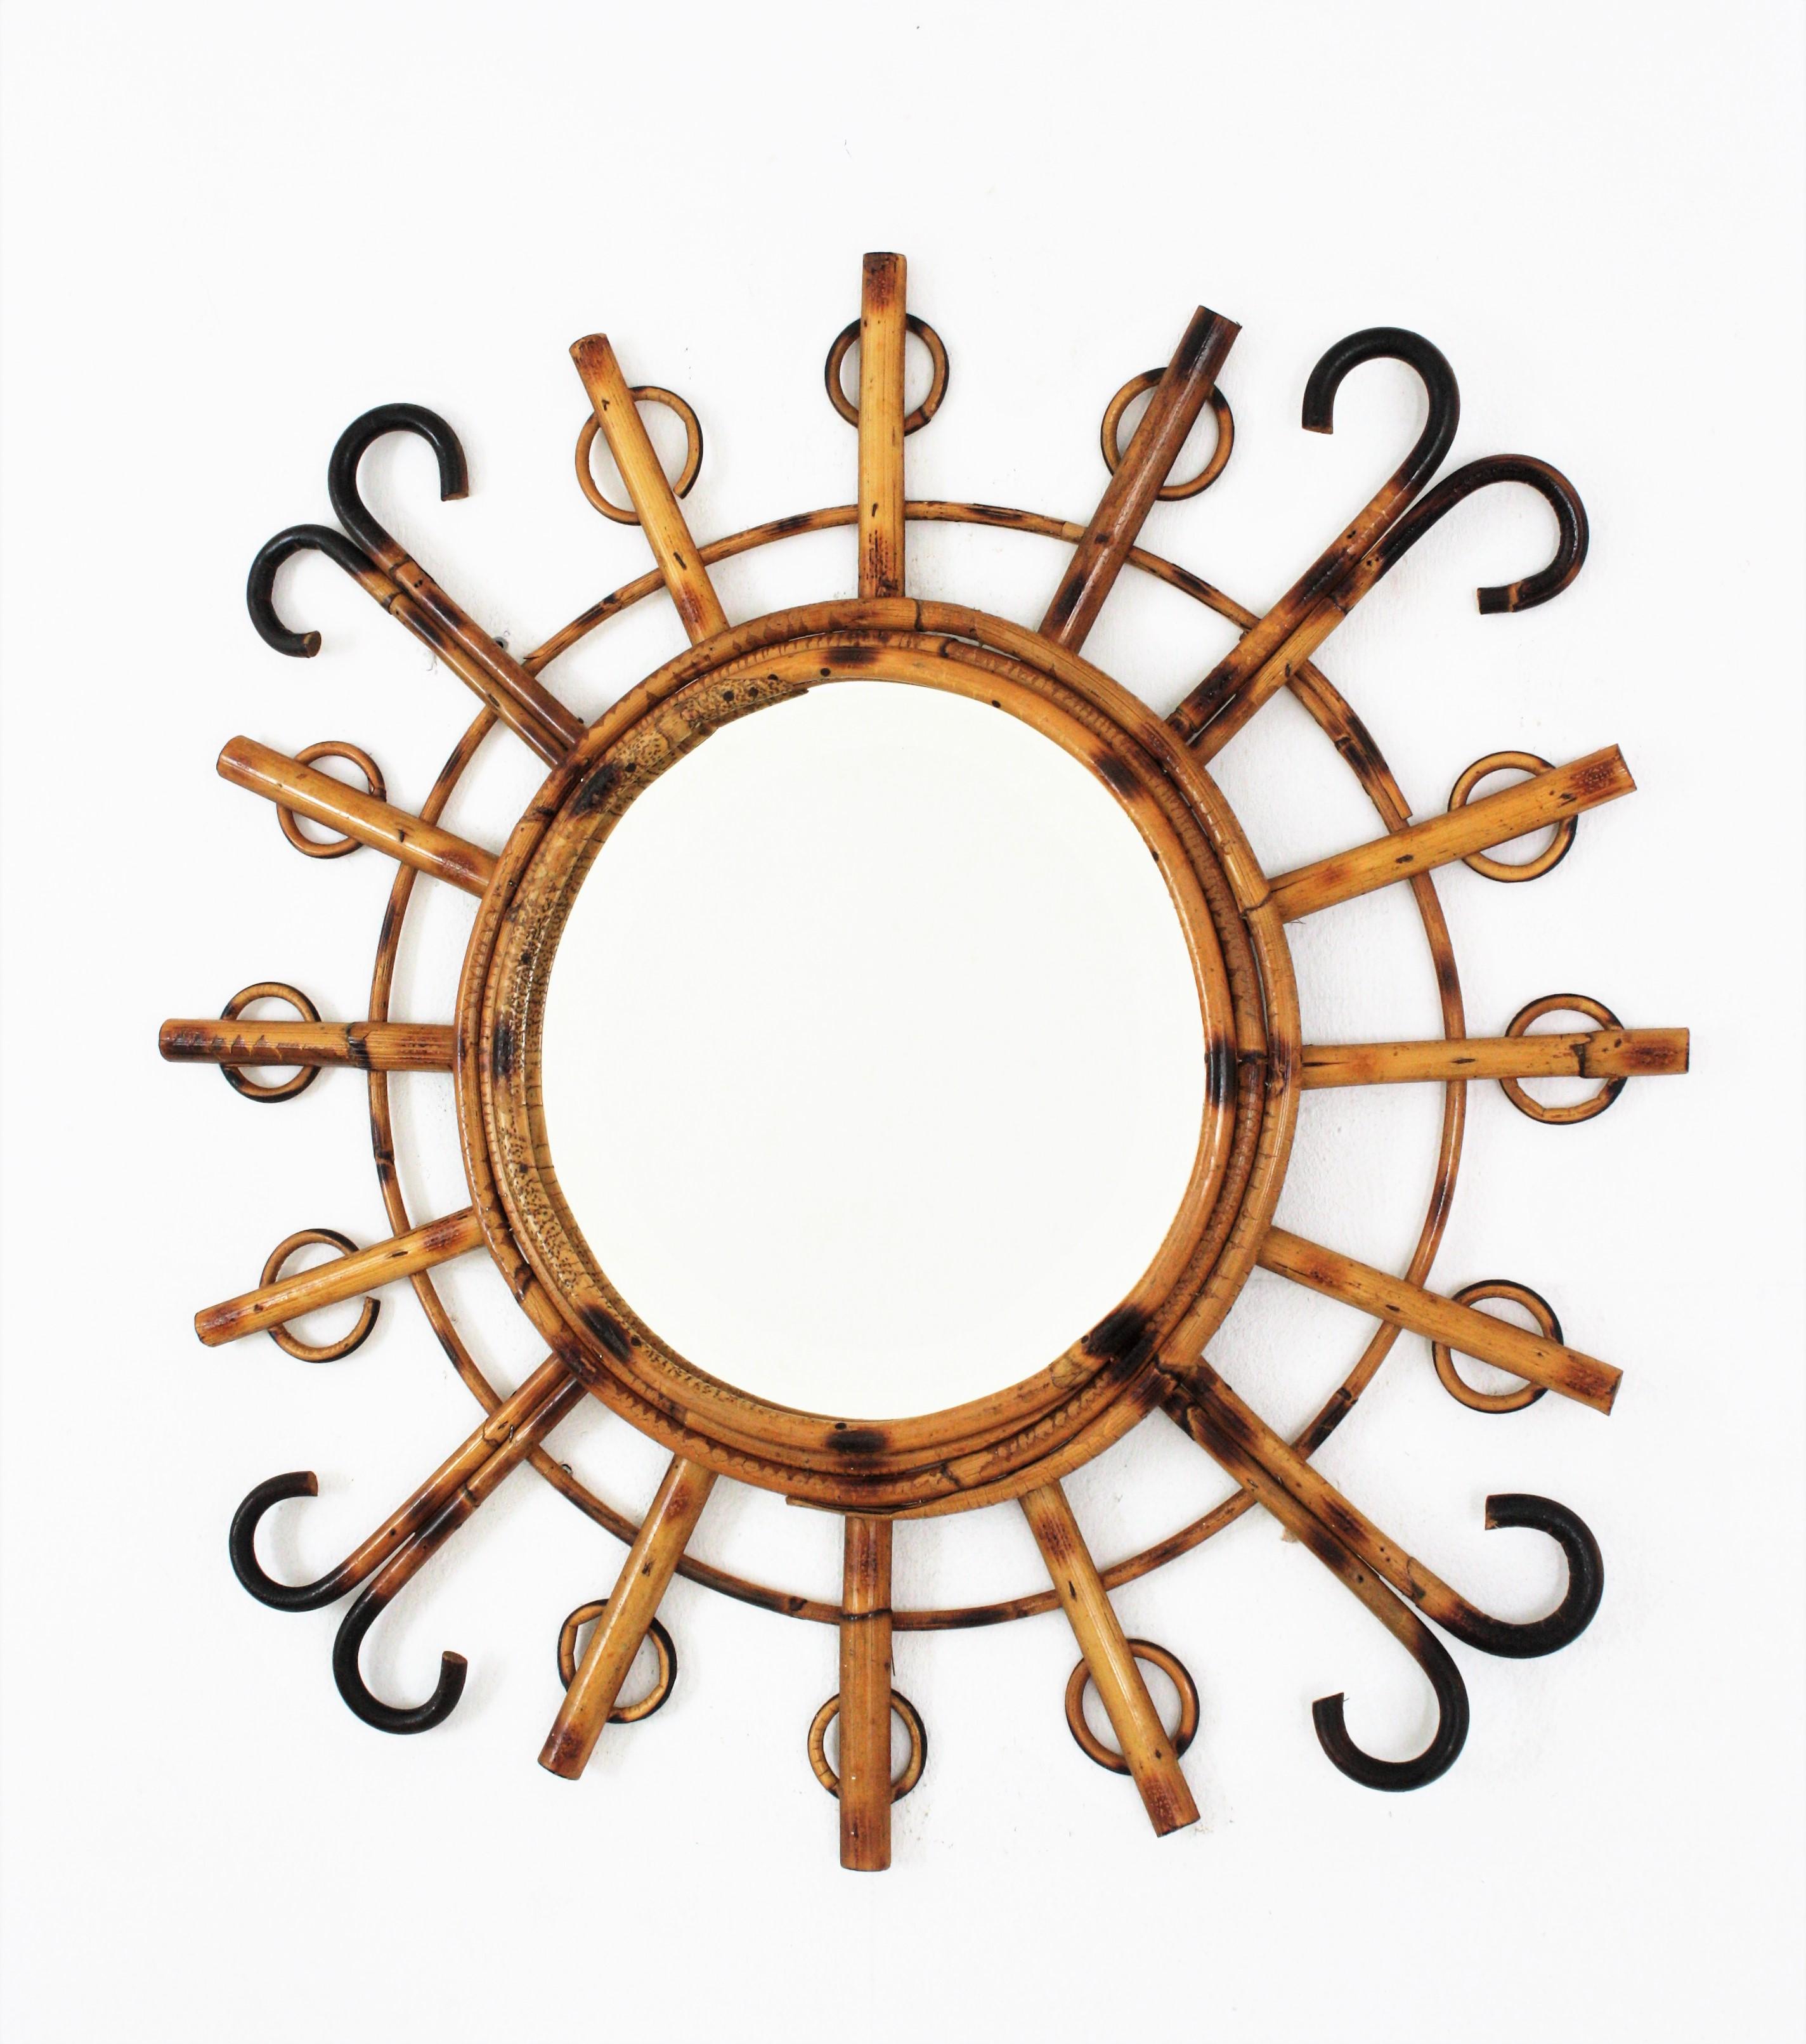 Sunburst starburst mirror handcrafted in rattan, France, 1950-1960.
A cool Mid-Century Modern handcrafted rattan mirror with star or sunburst shape and all the taste of the Mediterranean French Riviera style. It has curved endings and semi-circle